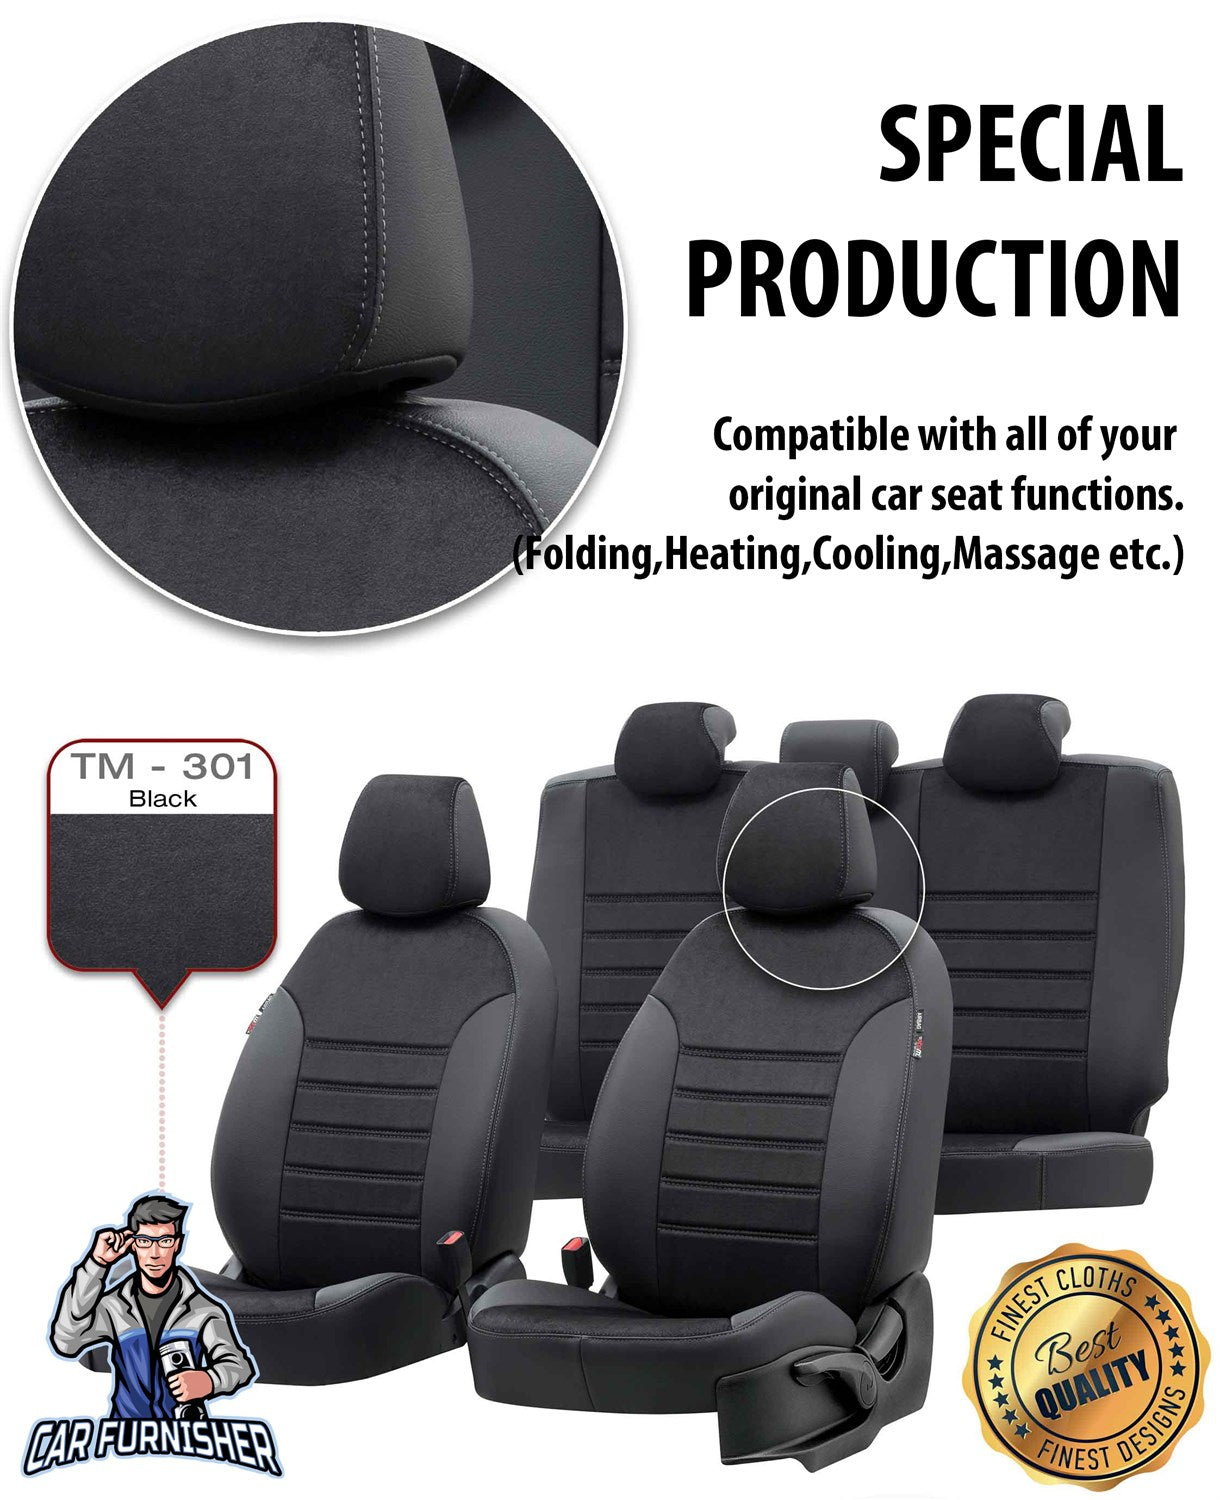 Mercedes GLC Series Seat Covers Milano Suede Design Smoked Black Leather & Suede Fabric